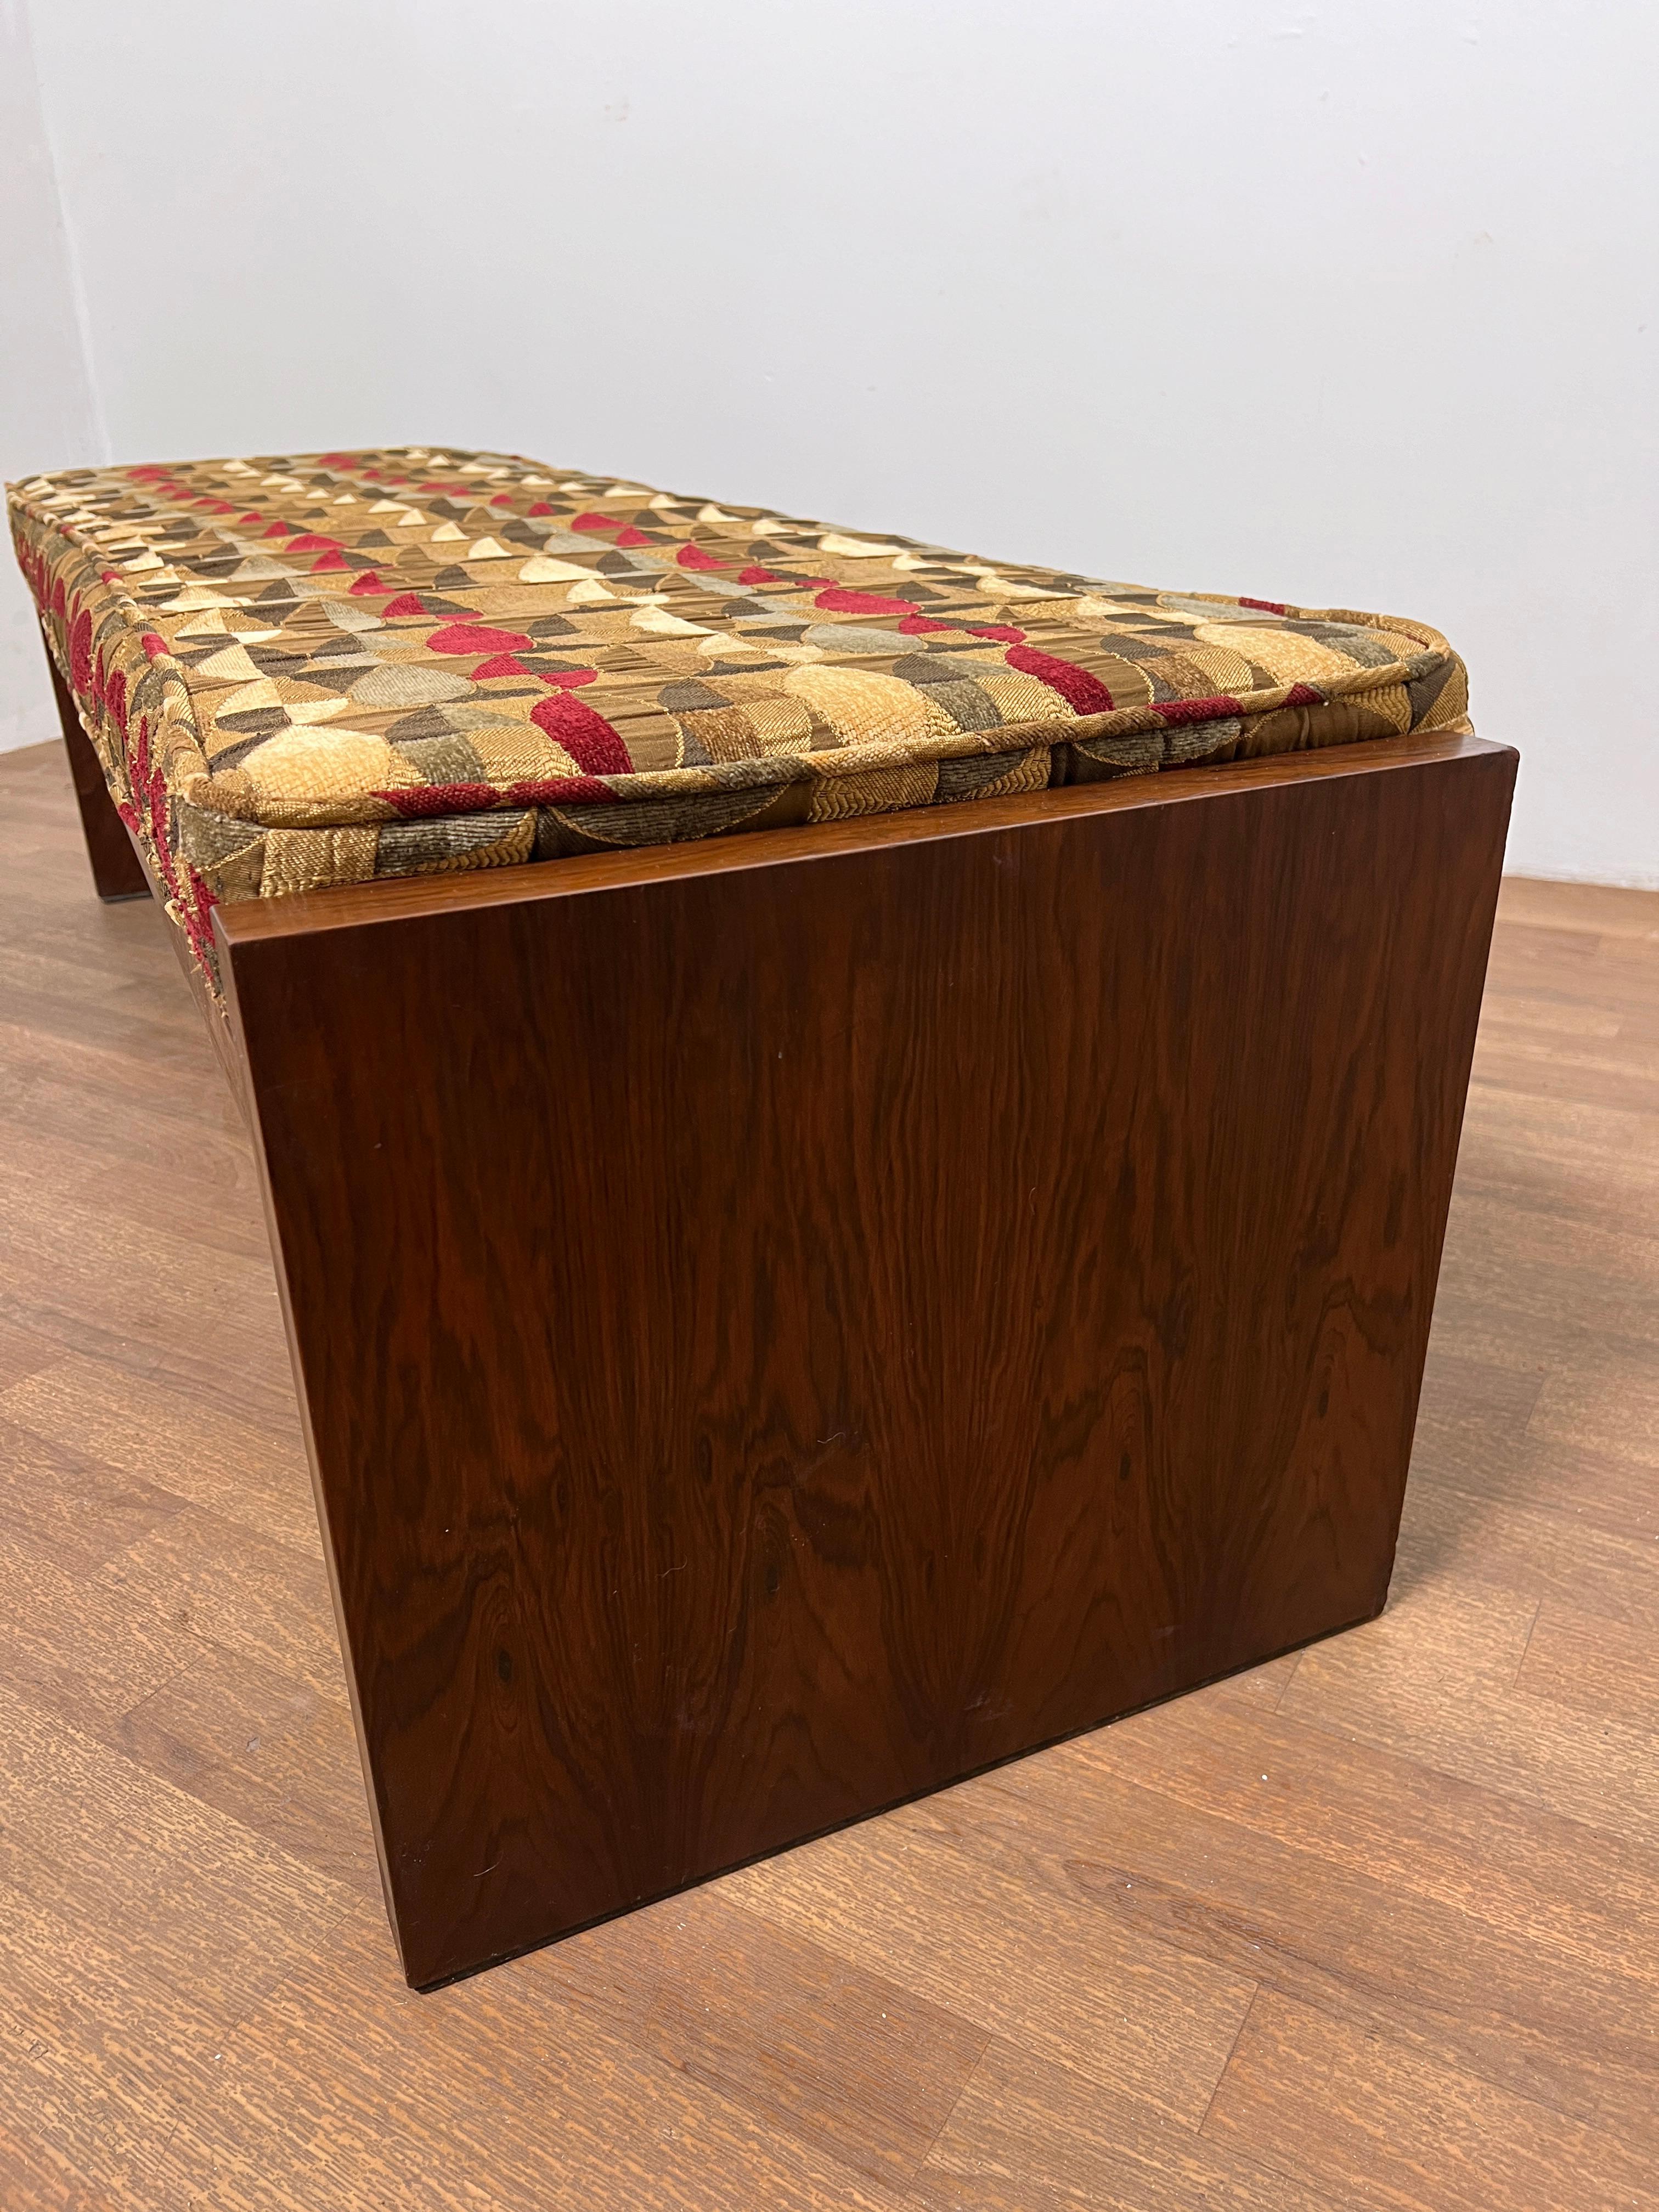 Signed Dunbar Furniture Rosewood Bench Attributed to Edward Wormley, Ca. 1960s For Sale 2